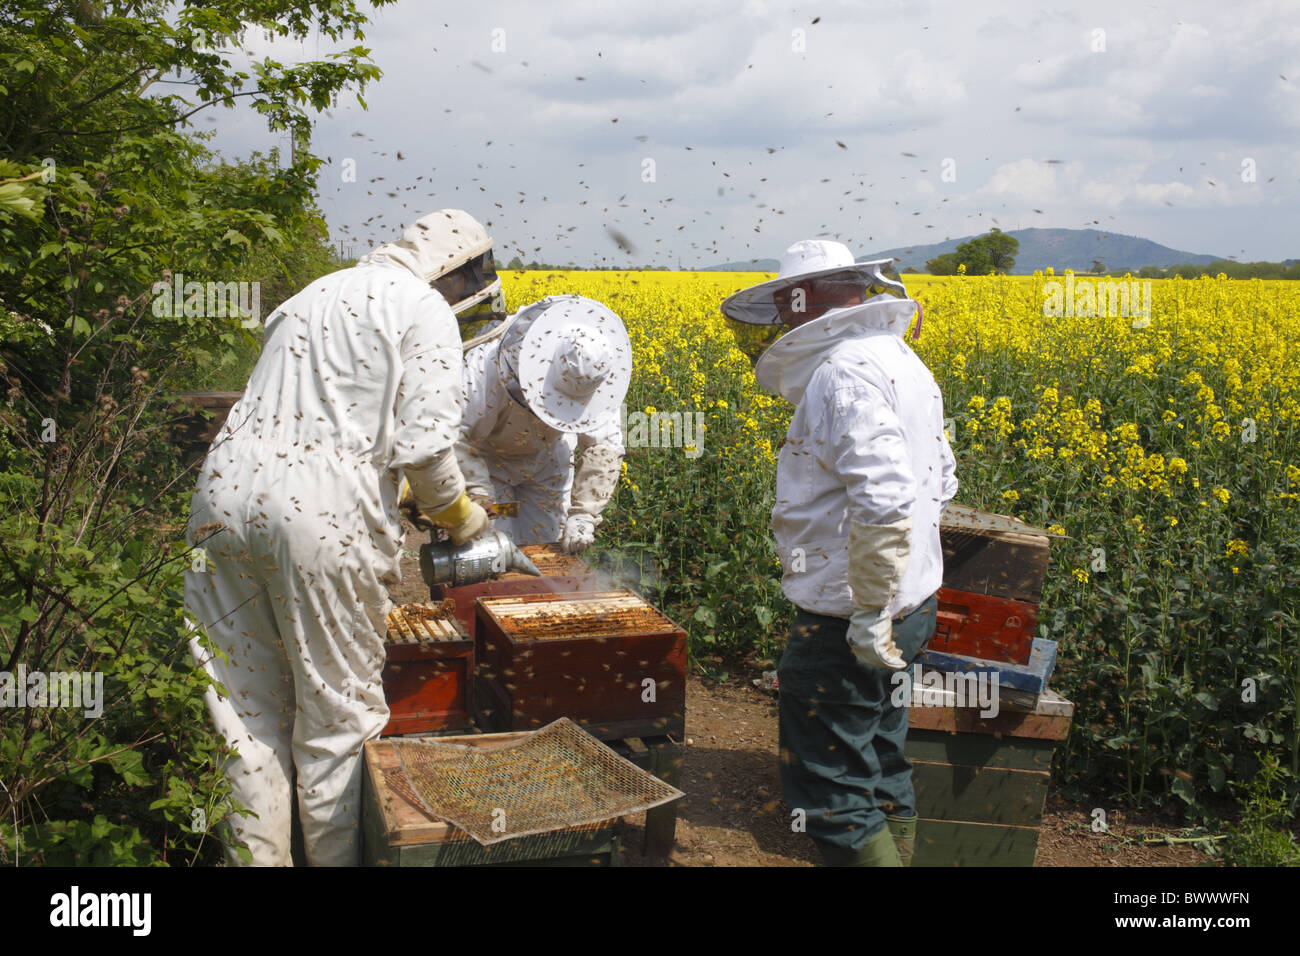 Professional beekeeping, beekeepers examining Western Honey Bee (Apis mellifera) hives for queen cells and adding new supers Stock Photo